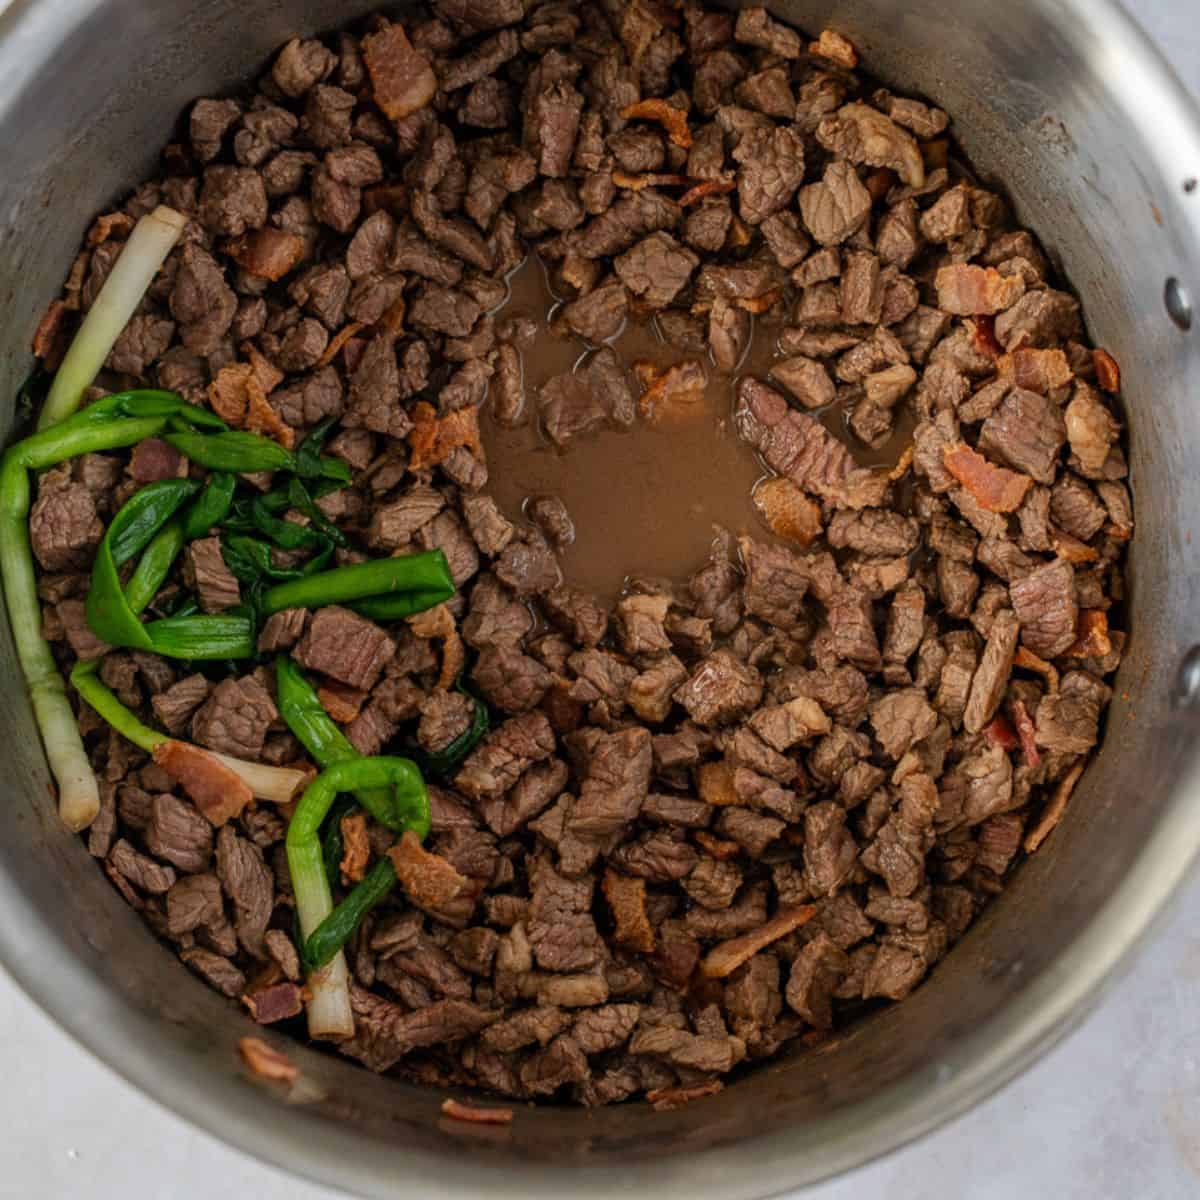 Cooked diced beef, bacon, and green onions in a pot.